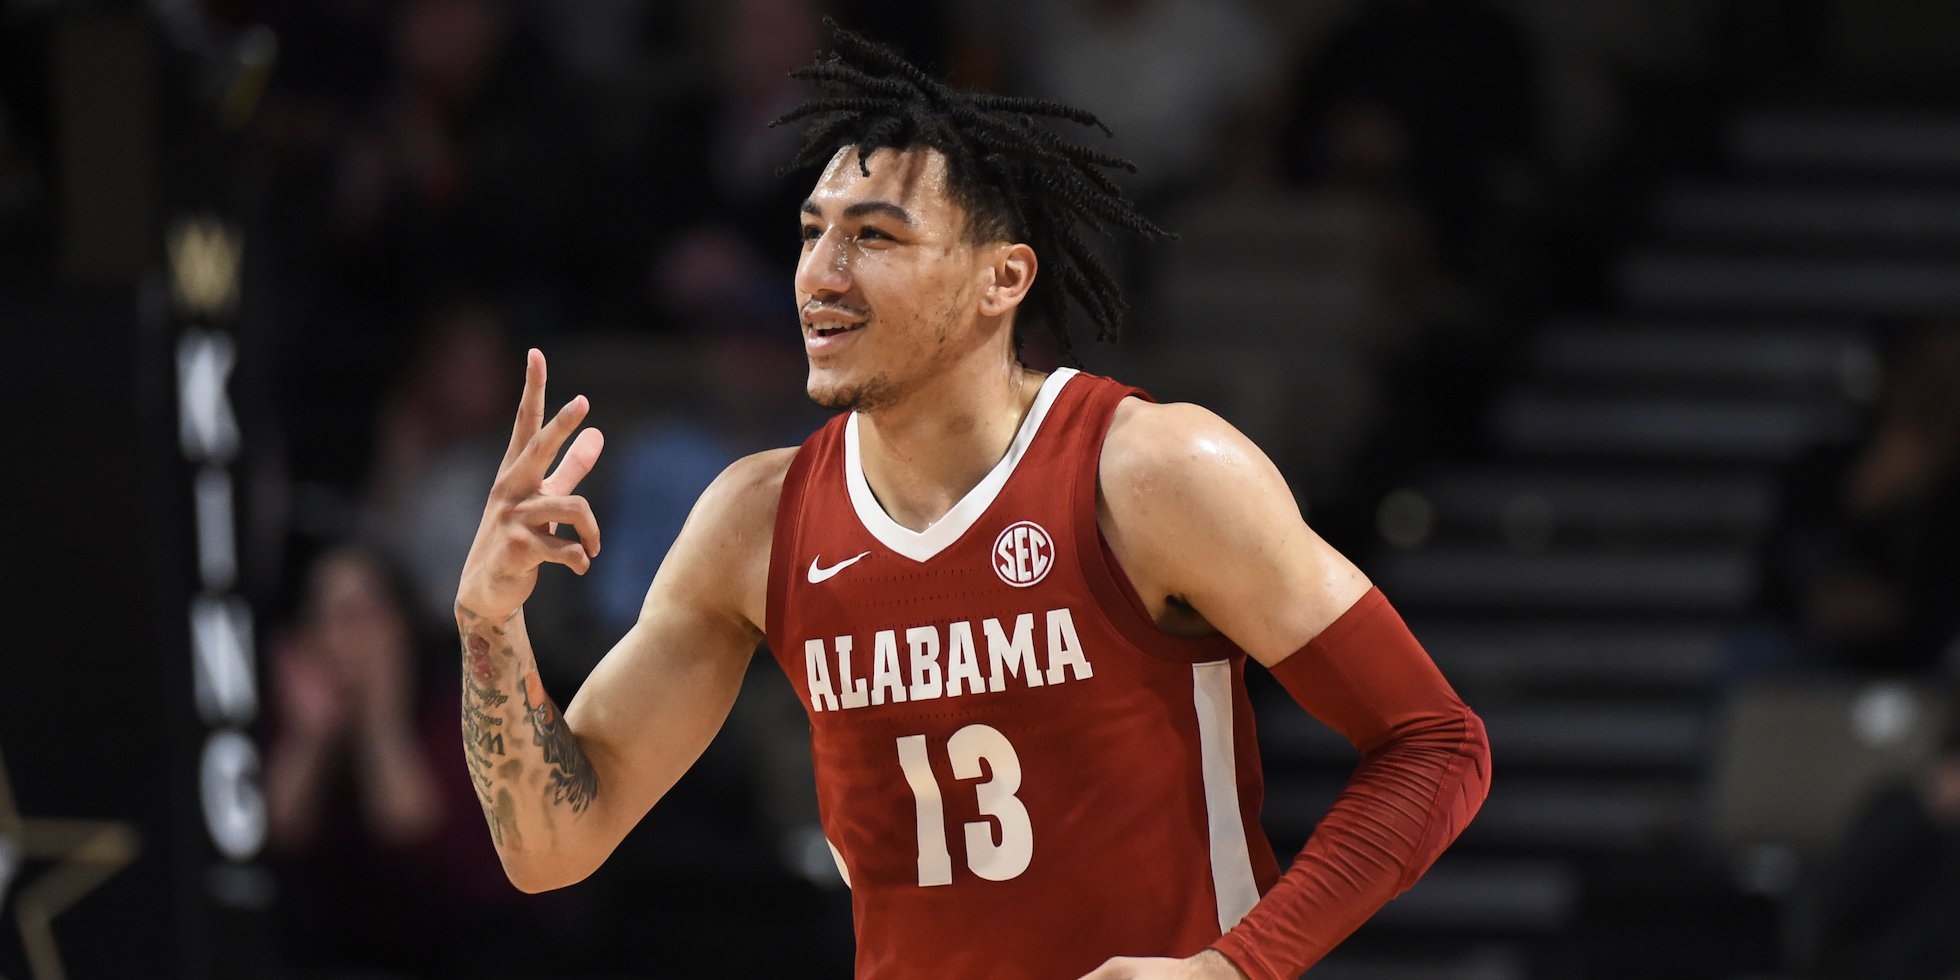 Jahvon Quinerly Returns for Crimson Tide Less than 8 Months After Knee Injury